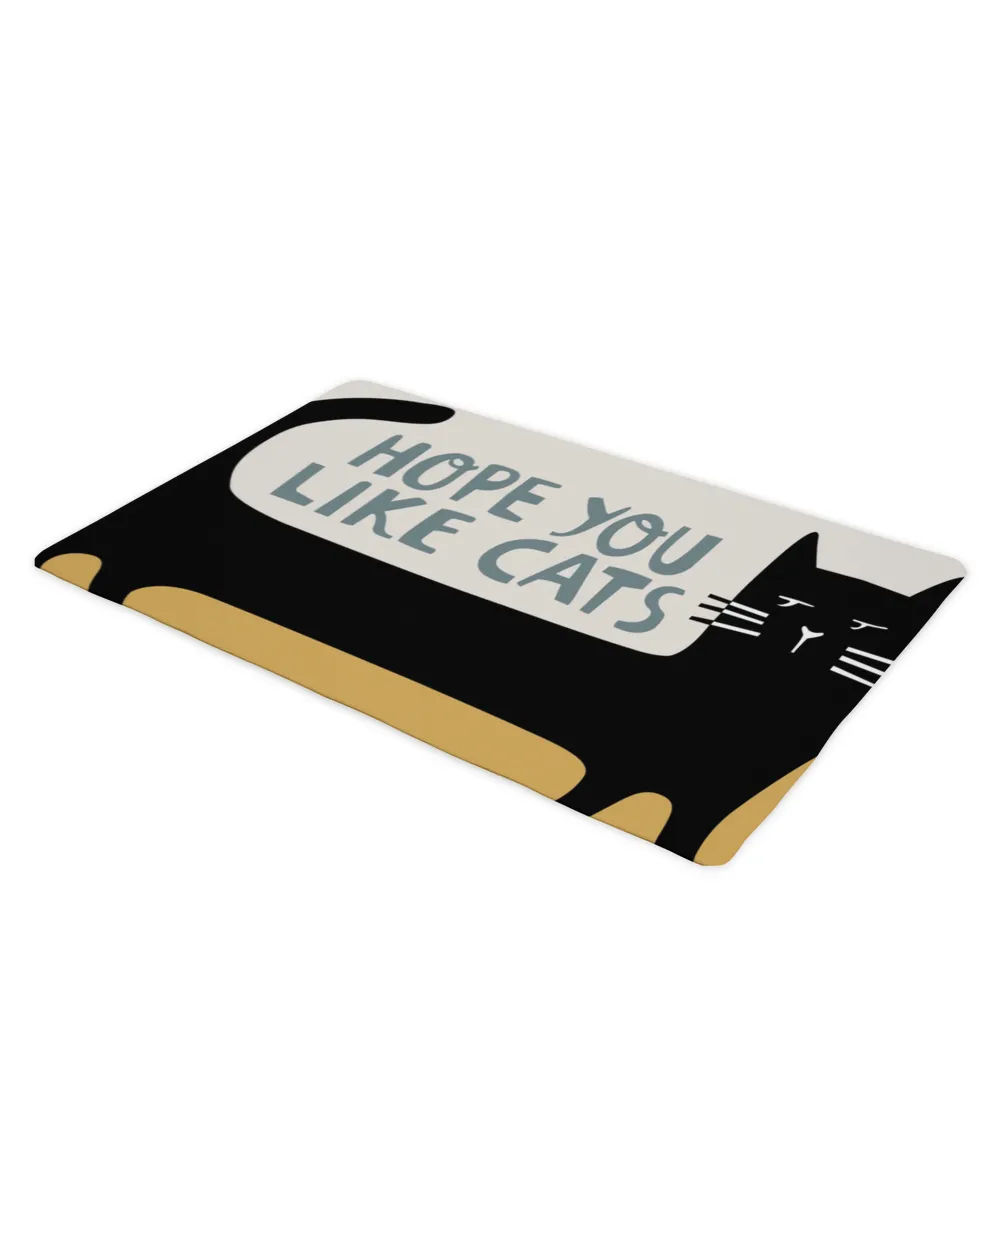 Hope You Like Cats Doormat HOC310323DRM1